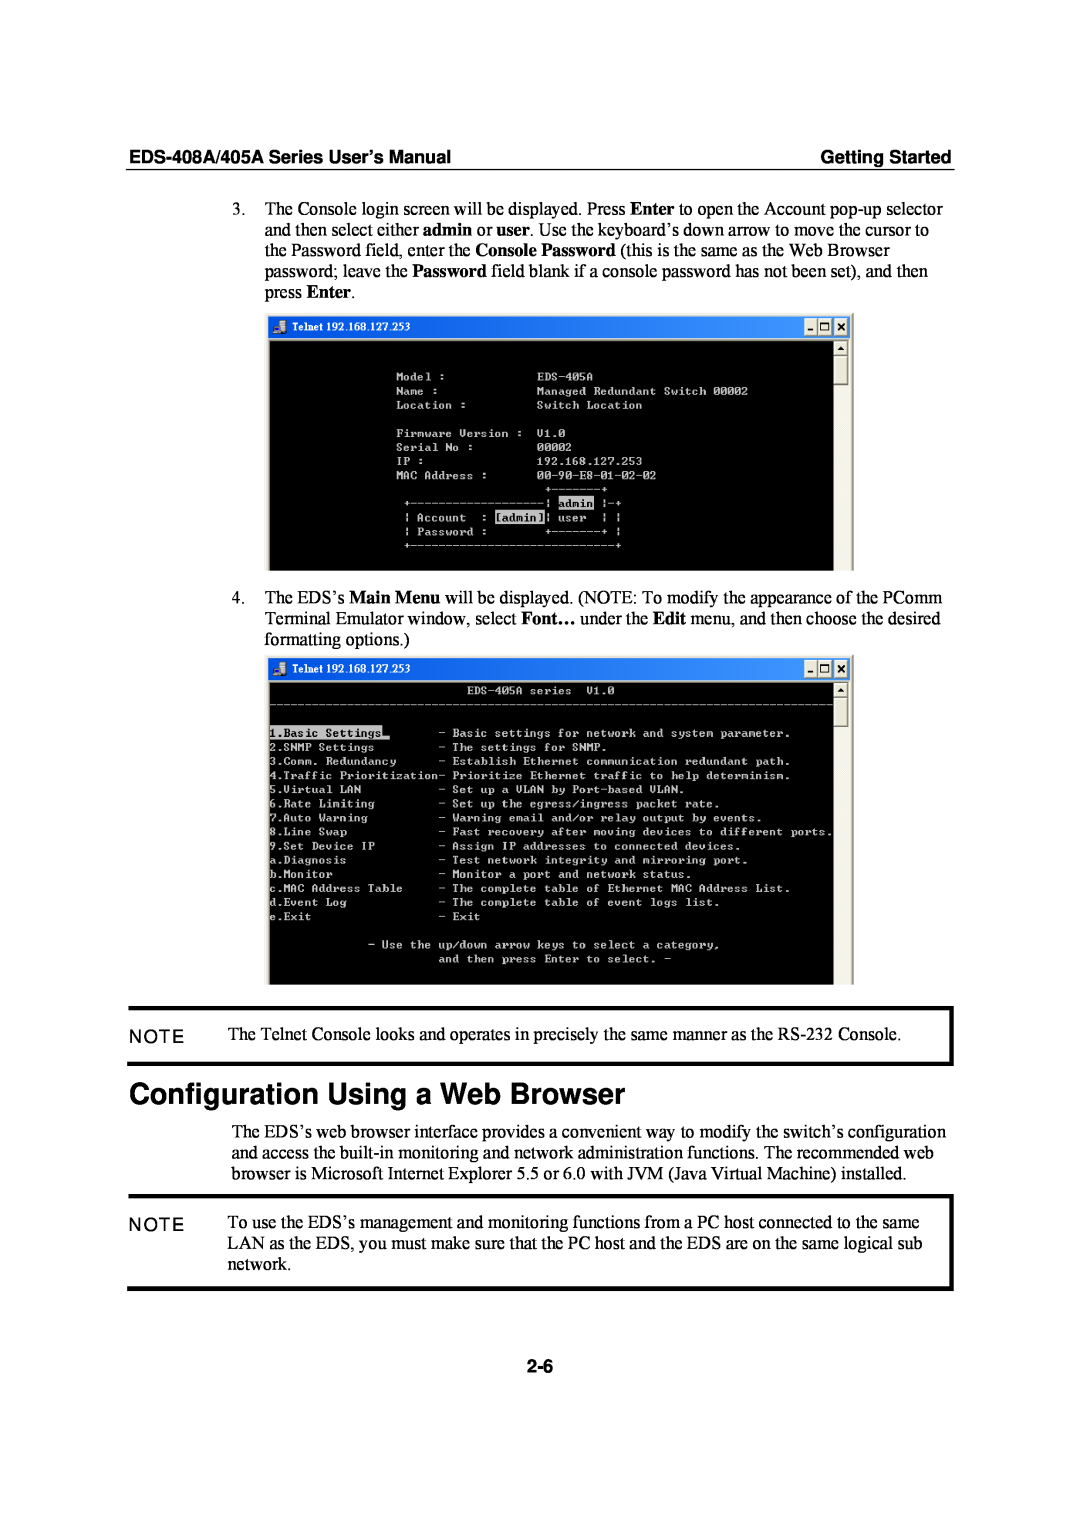 Moxa Technologies EDS-405A Configuration Using a Web Browser, EDS-408A/405A Series User’s Manual, Getting Started 